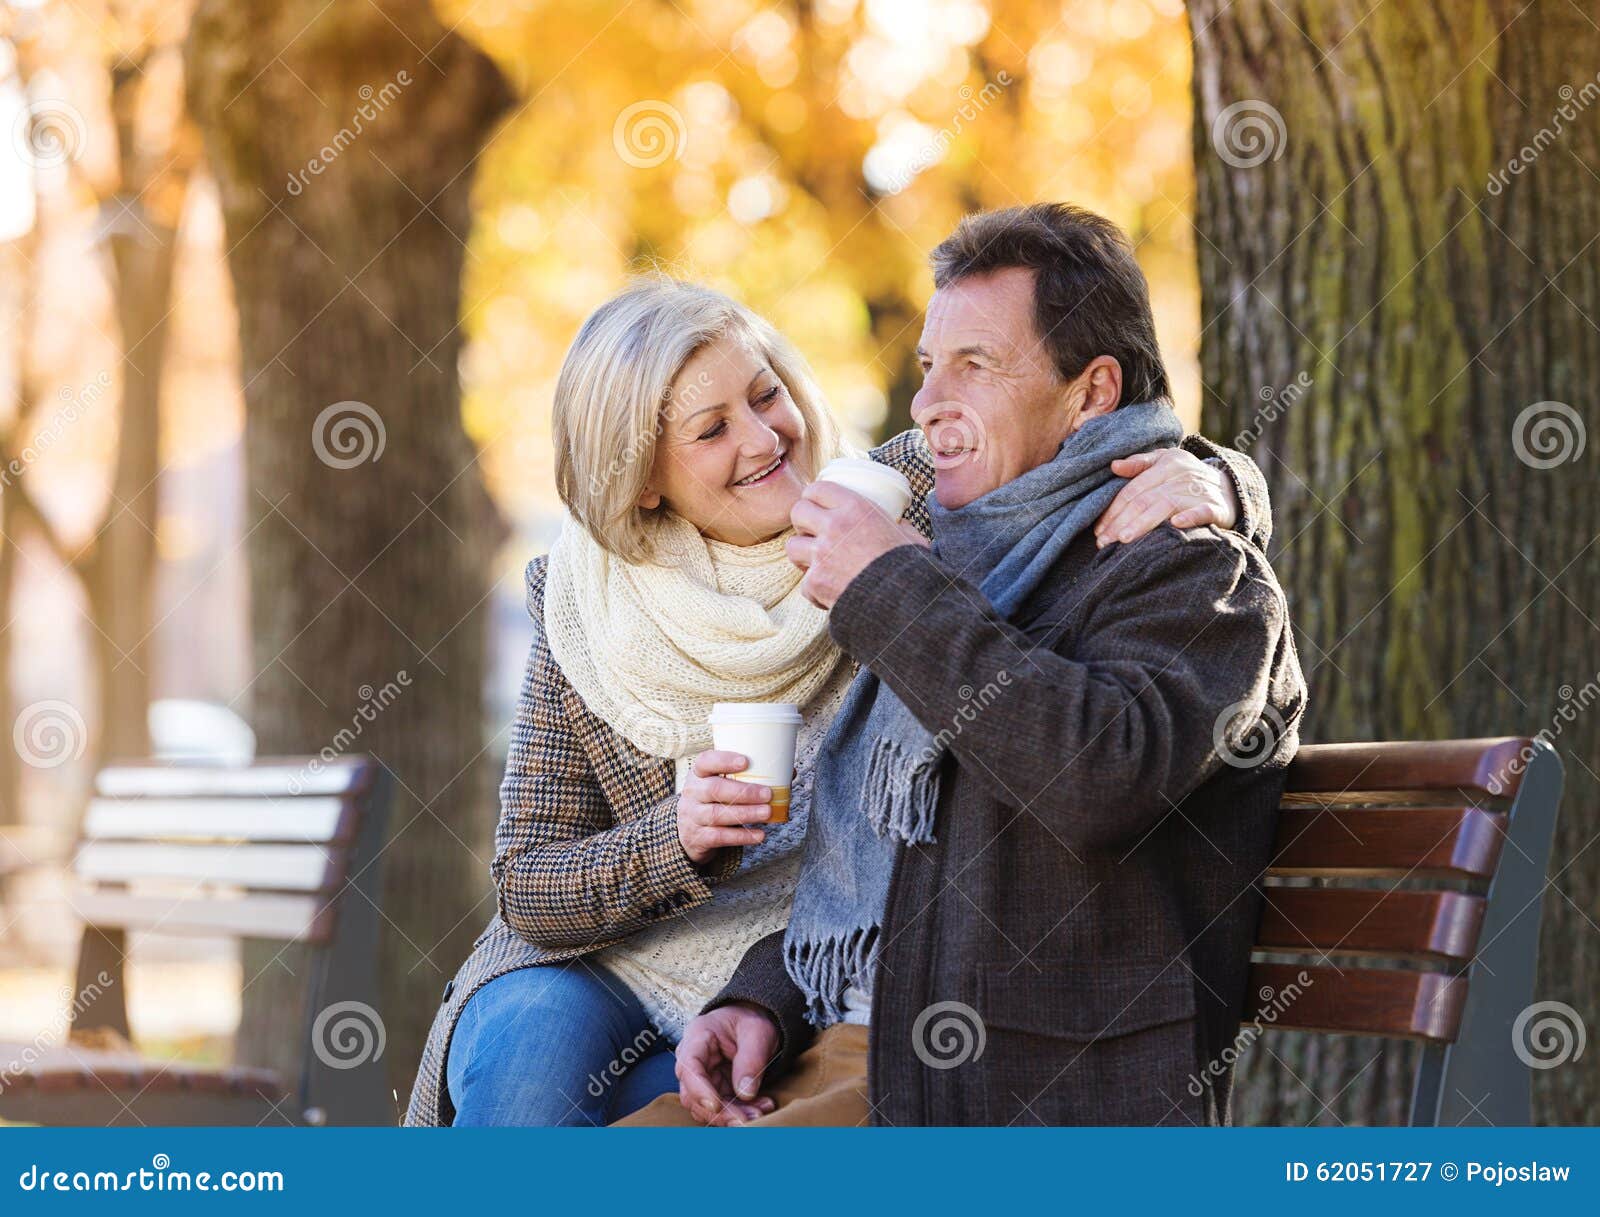 Active seniors in town stock image. Image of sitting - 62051727